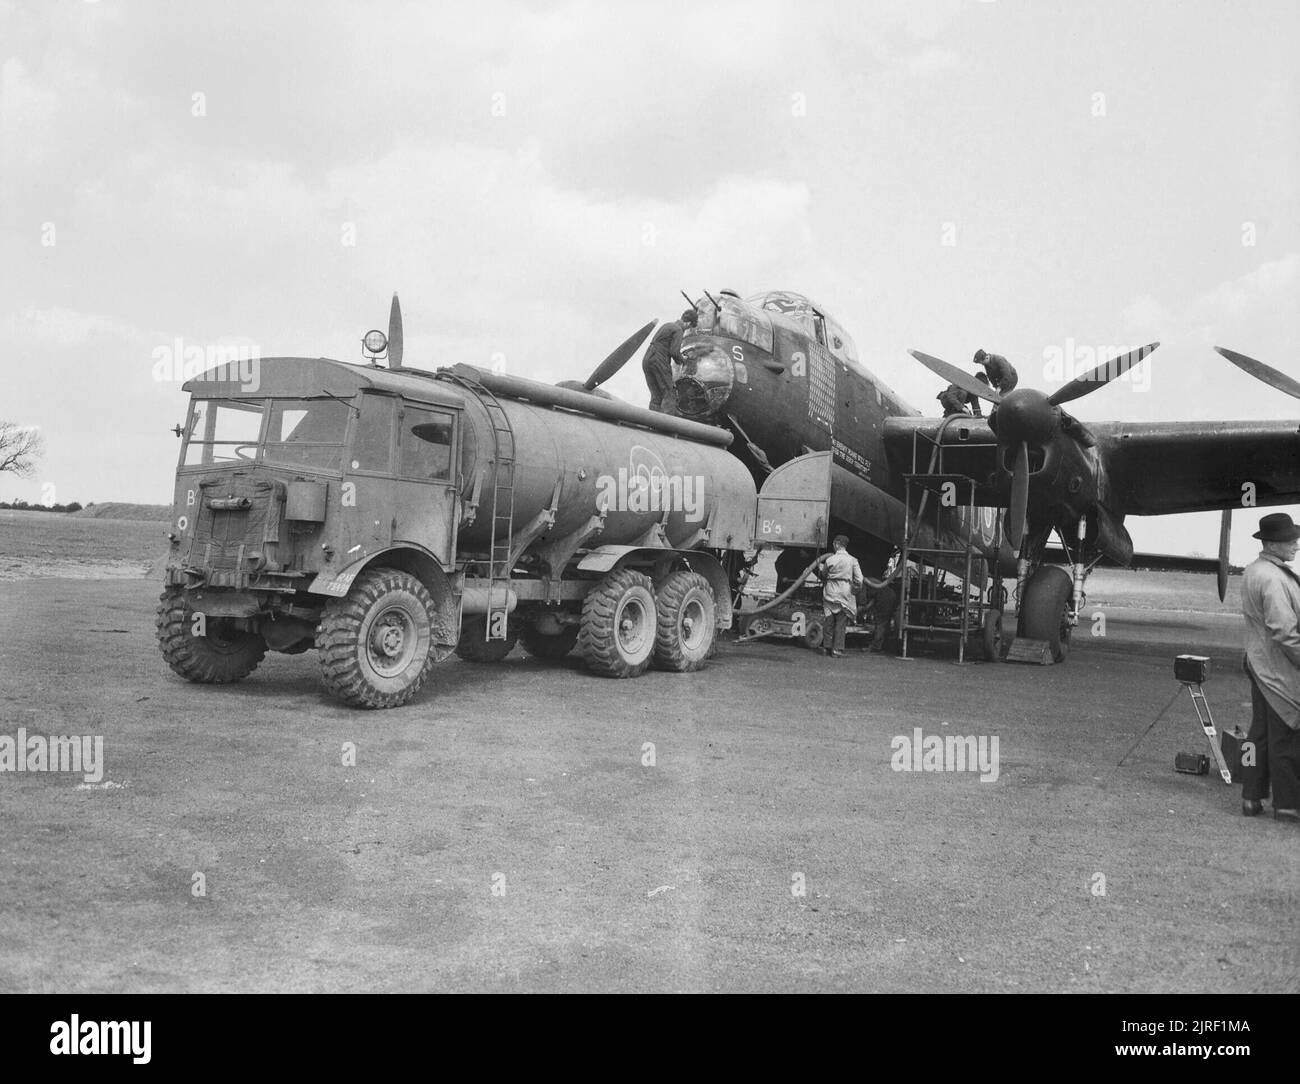 The Royal Air Force during the Second World War The Avro Lancaster B I R5868 'S-Sugar' refuels at RAF Hunsdon after completing its 100th operation the previous evening against Bourg Leopold in Belgium on 12 May 1944. The 2500 gallon tank truck is AEC 854. Stock Photo